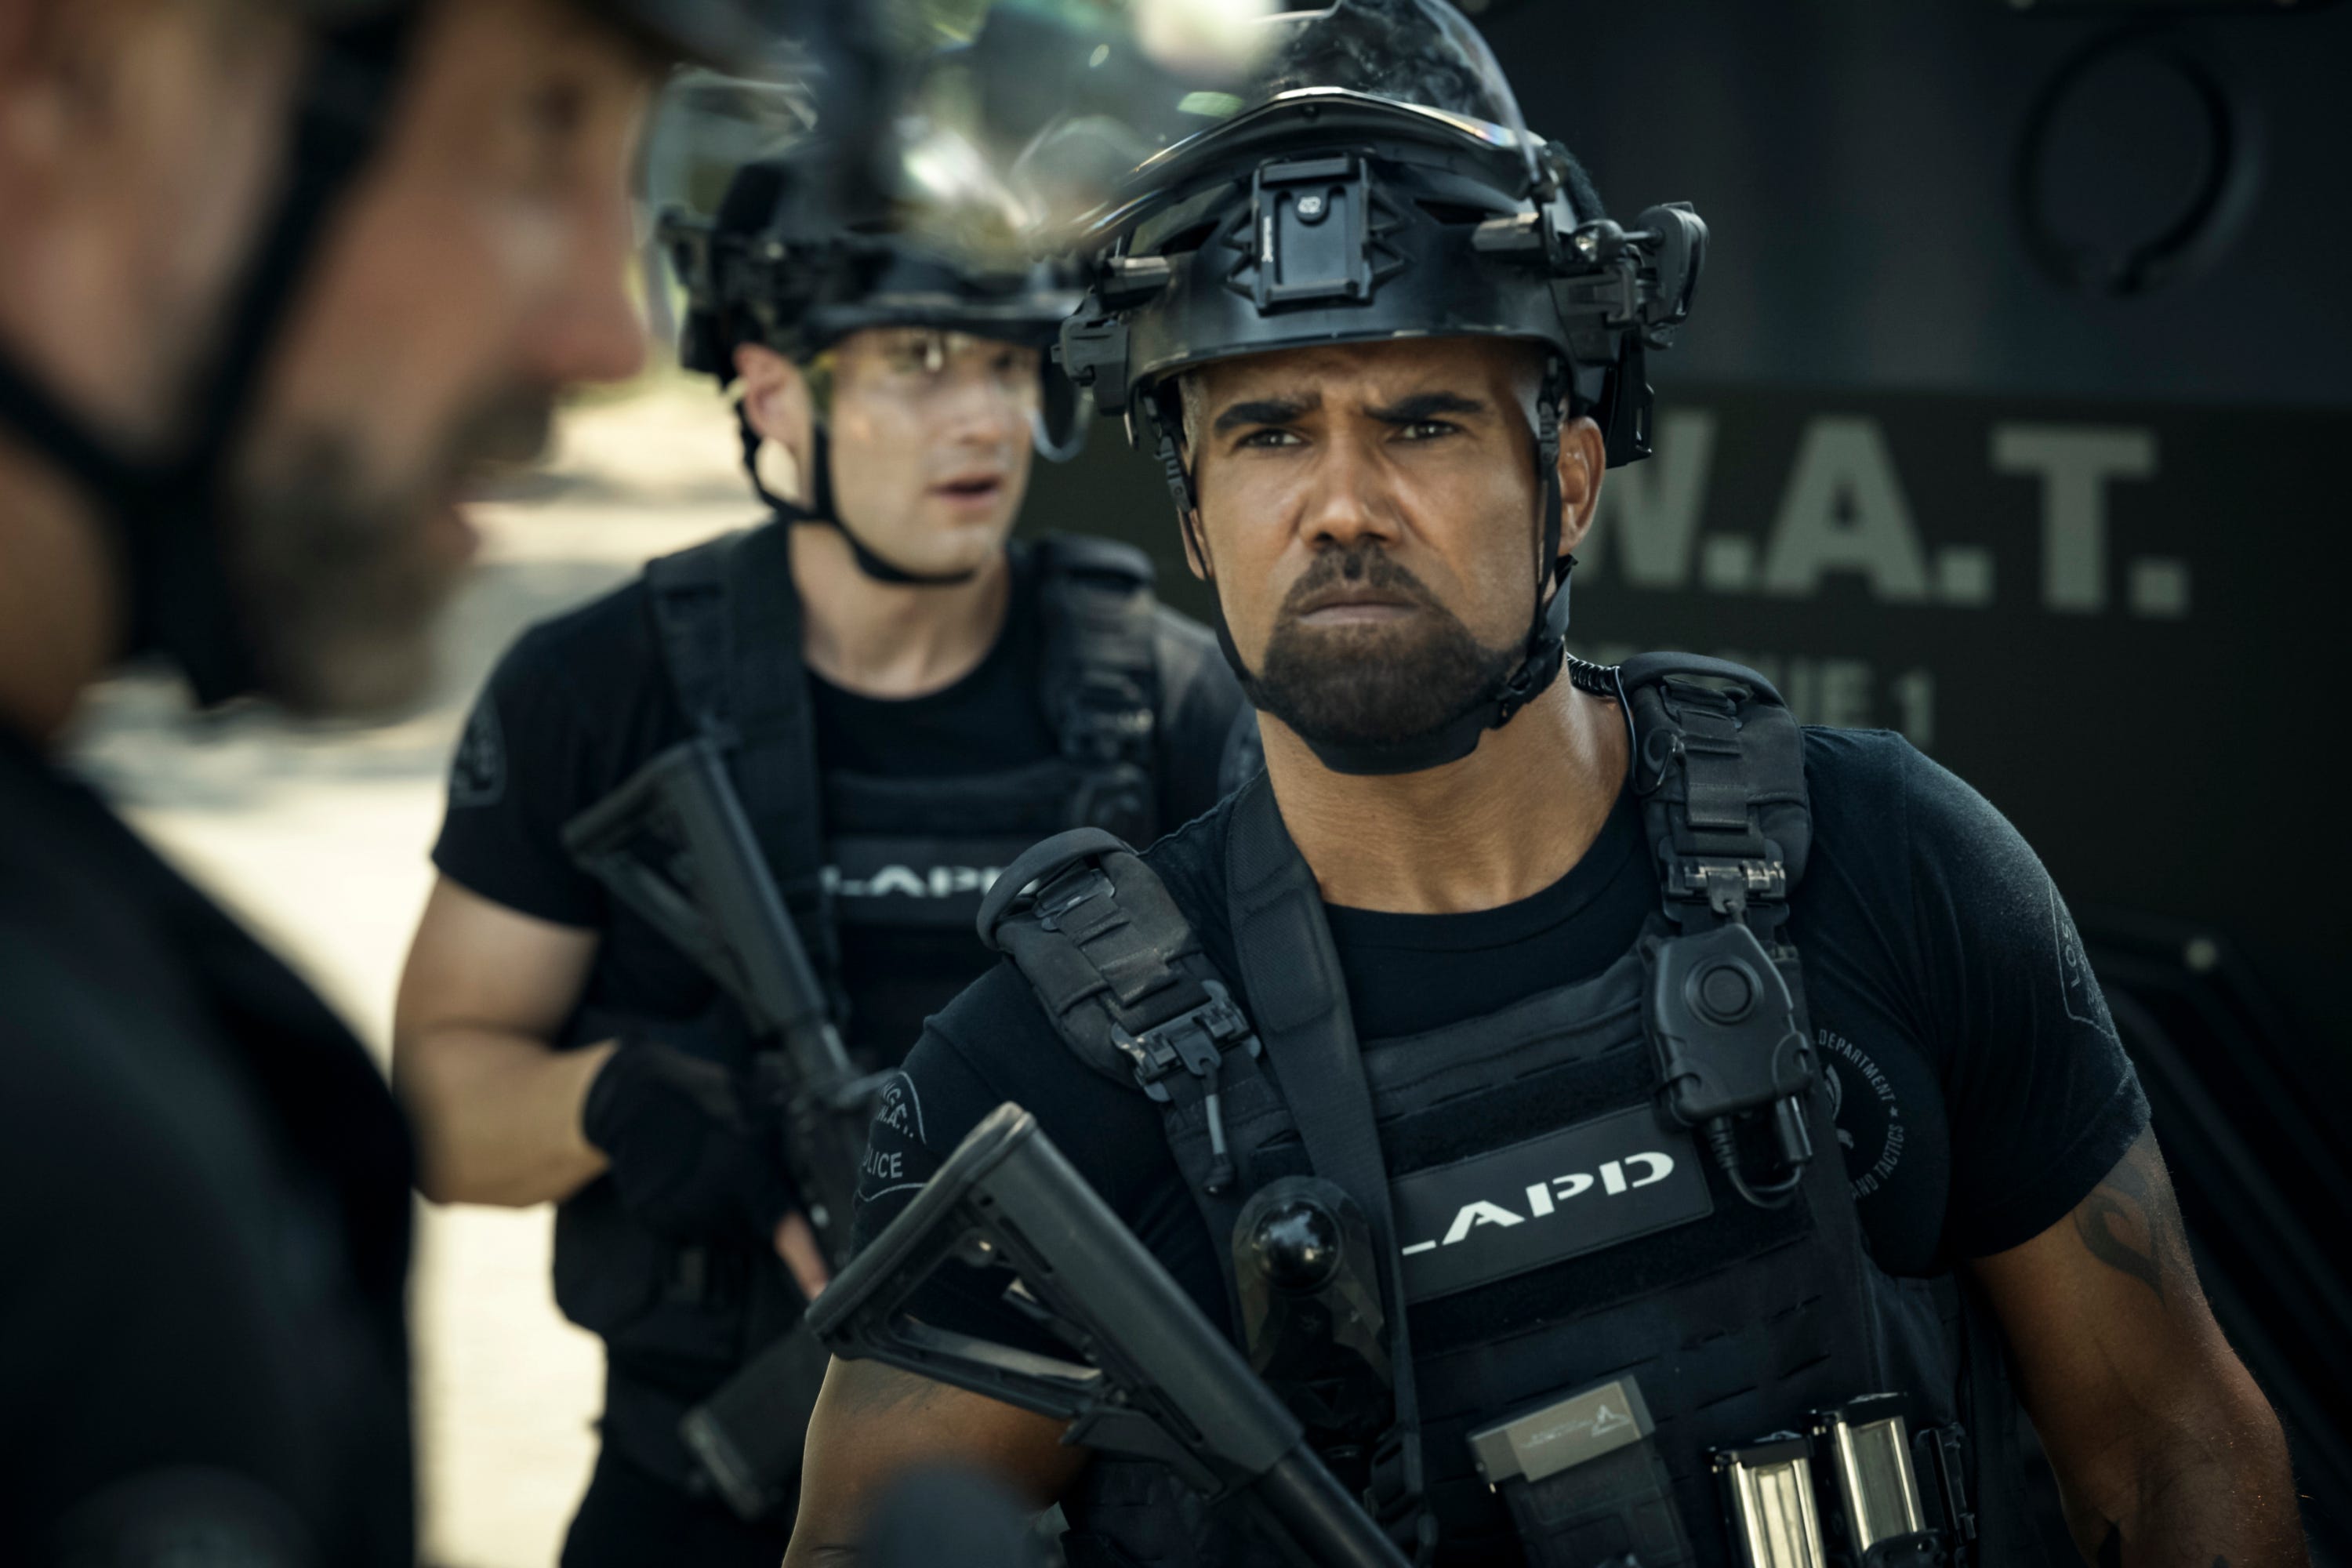 Shemar Moore as Daniel "Hondo" Harrelson on "S.W.A.T." The CBS series has dealt with issues of race and policing before, but was motivated to do more after the protests against police brutality this summer.